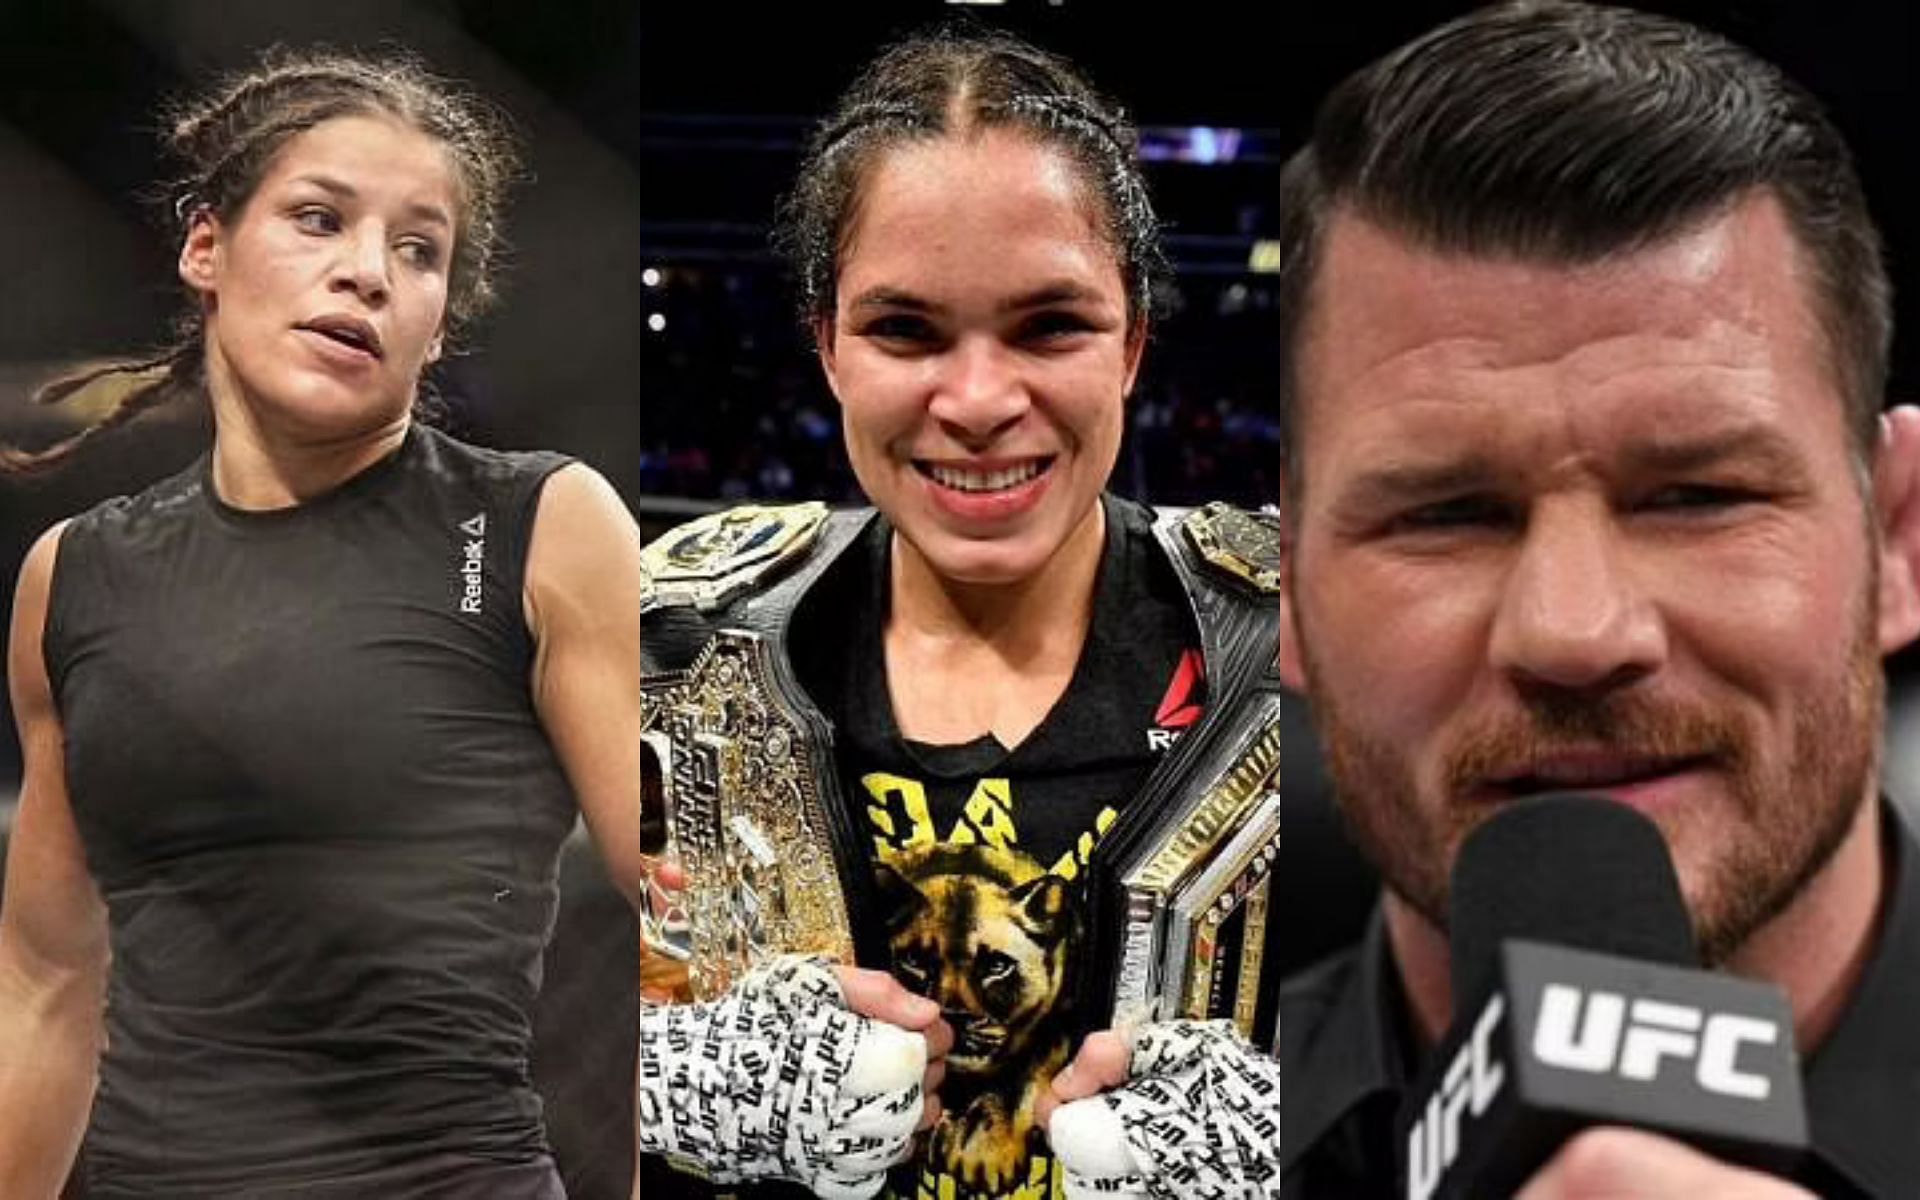 Julianna Pena, Amanda Nunes, and Michael Bisping (left to right)